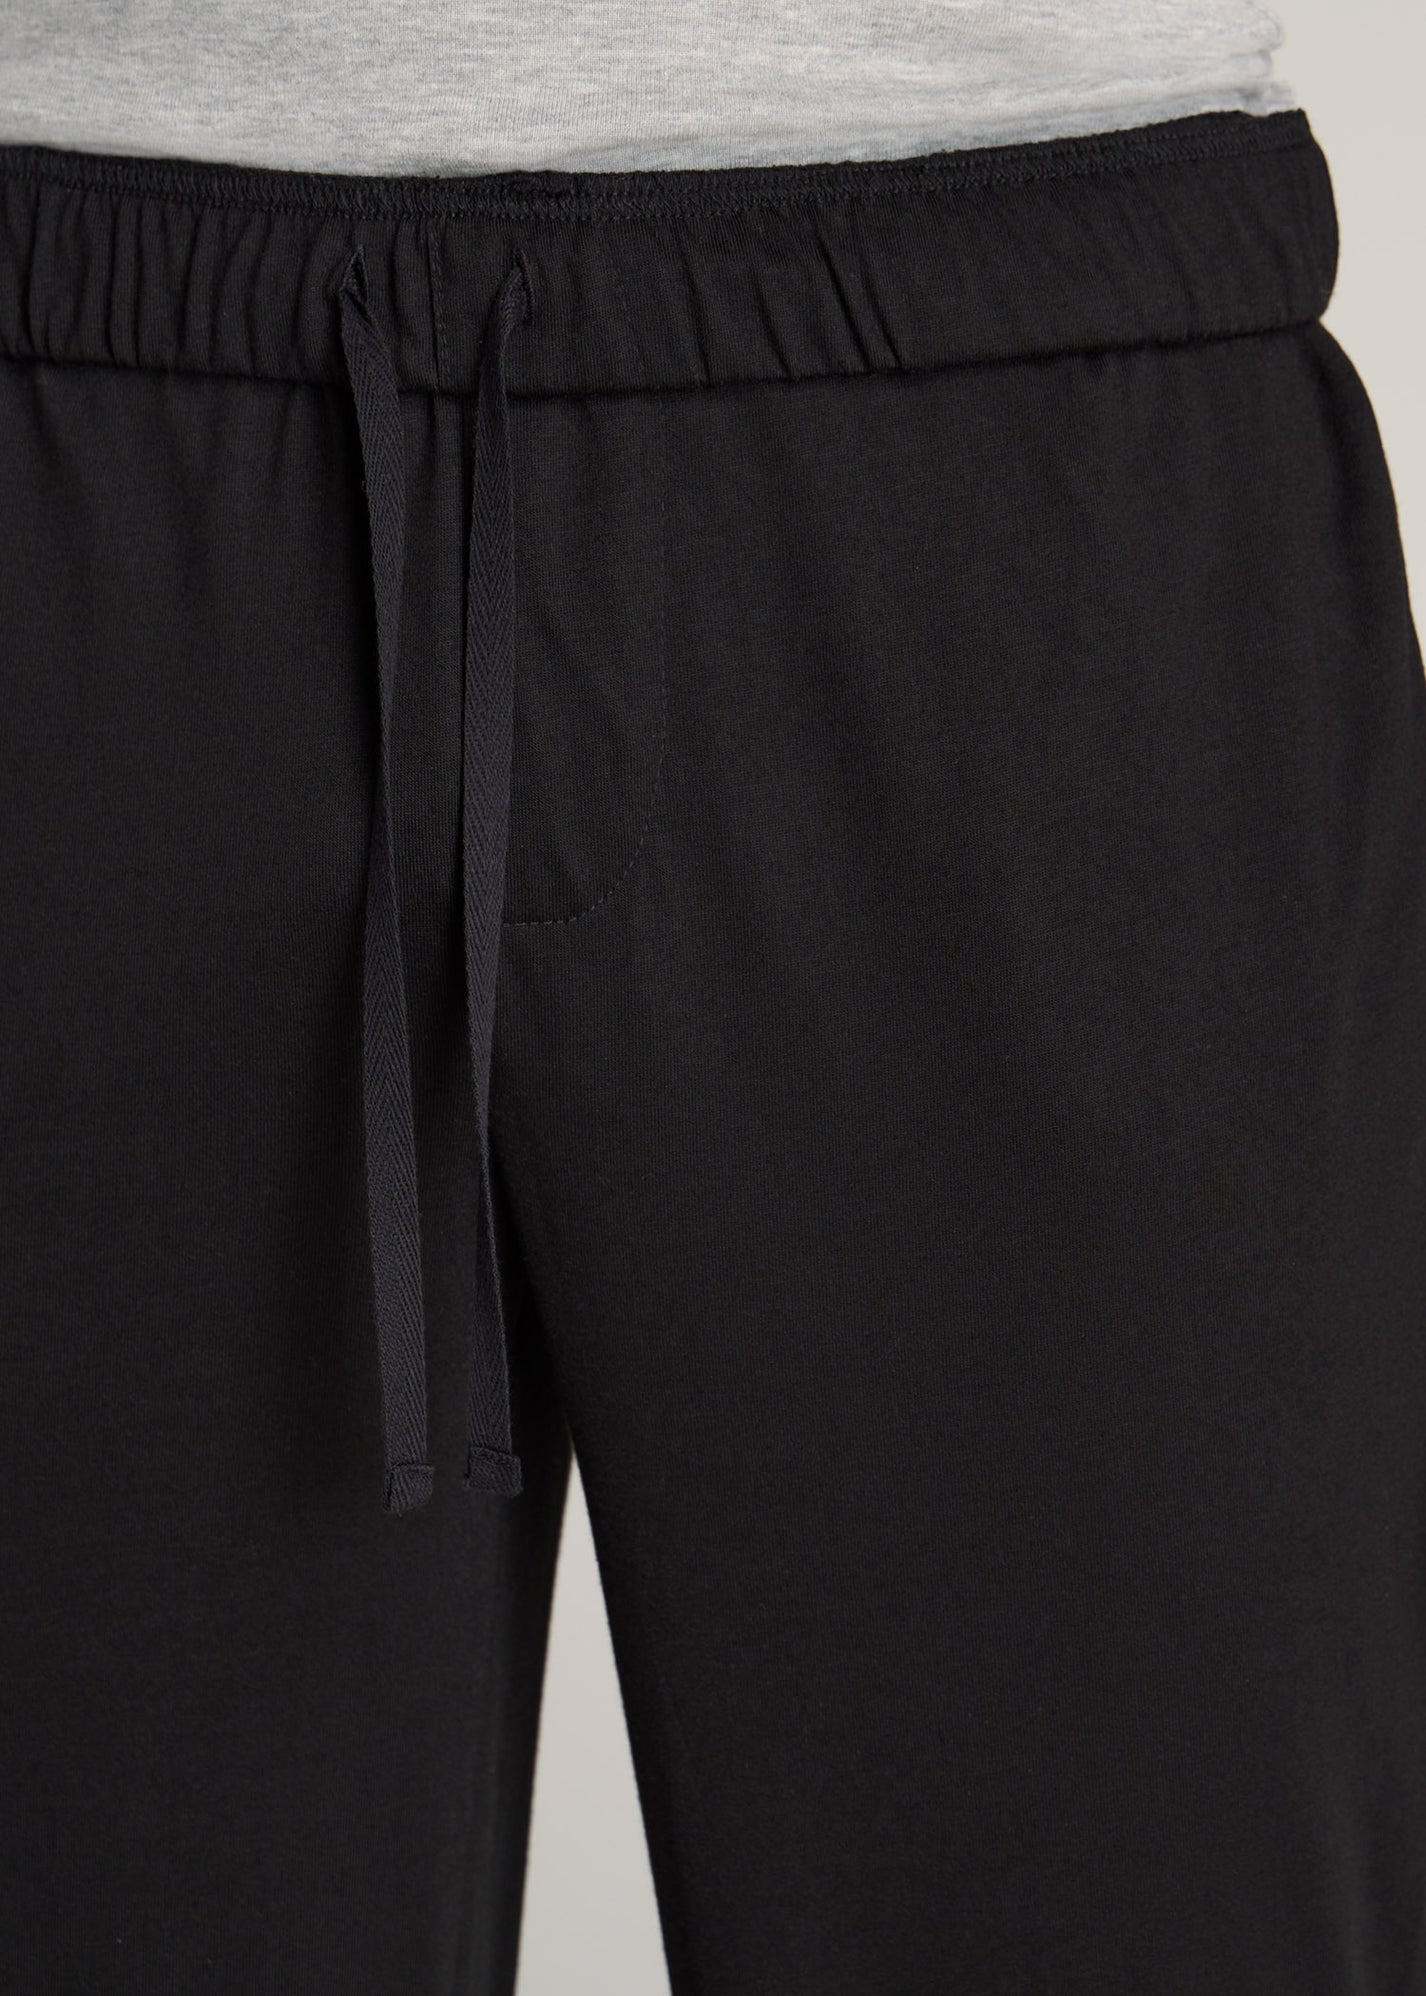 Black Tall Lounge Pant For Men | American Tall